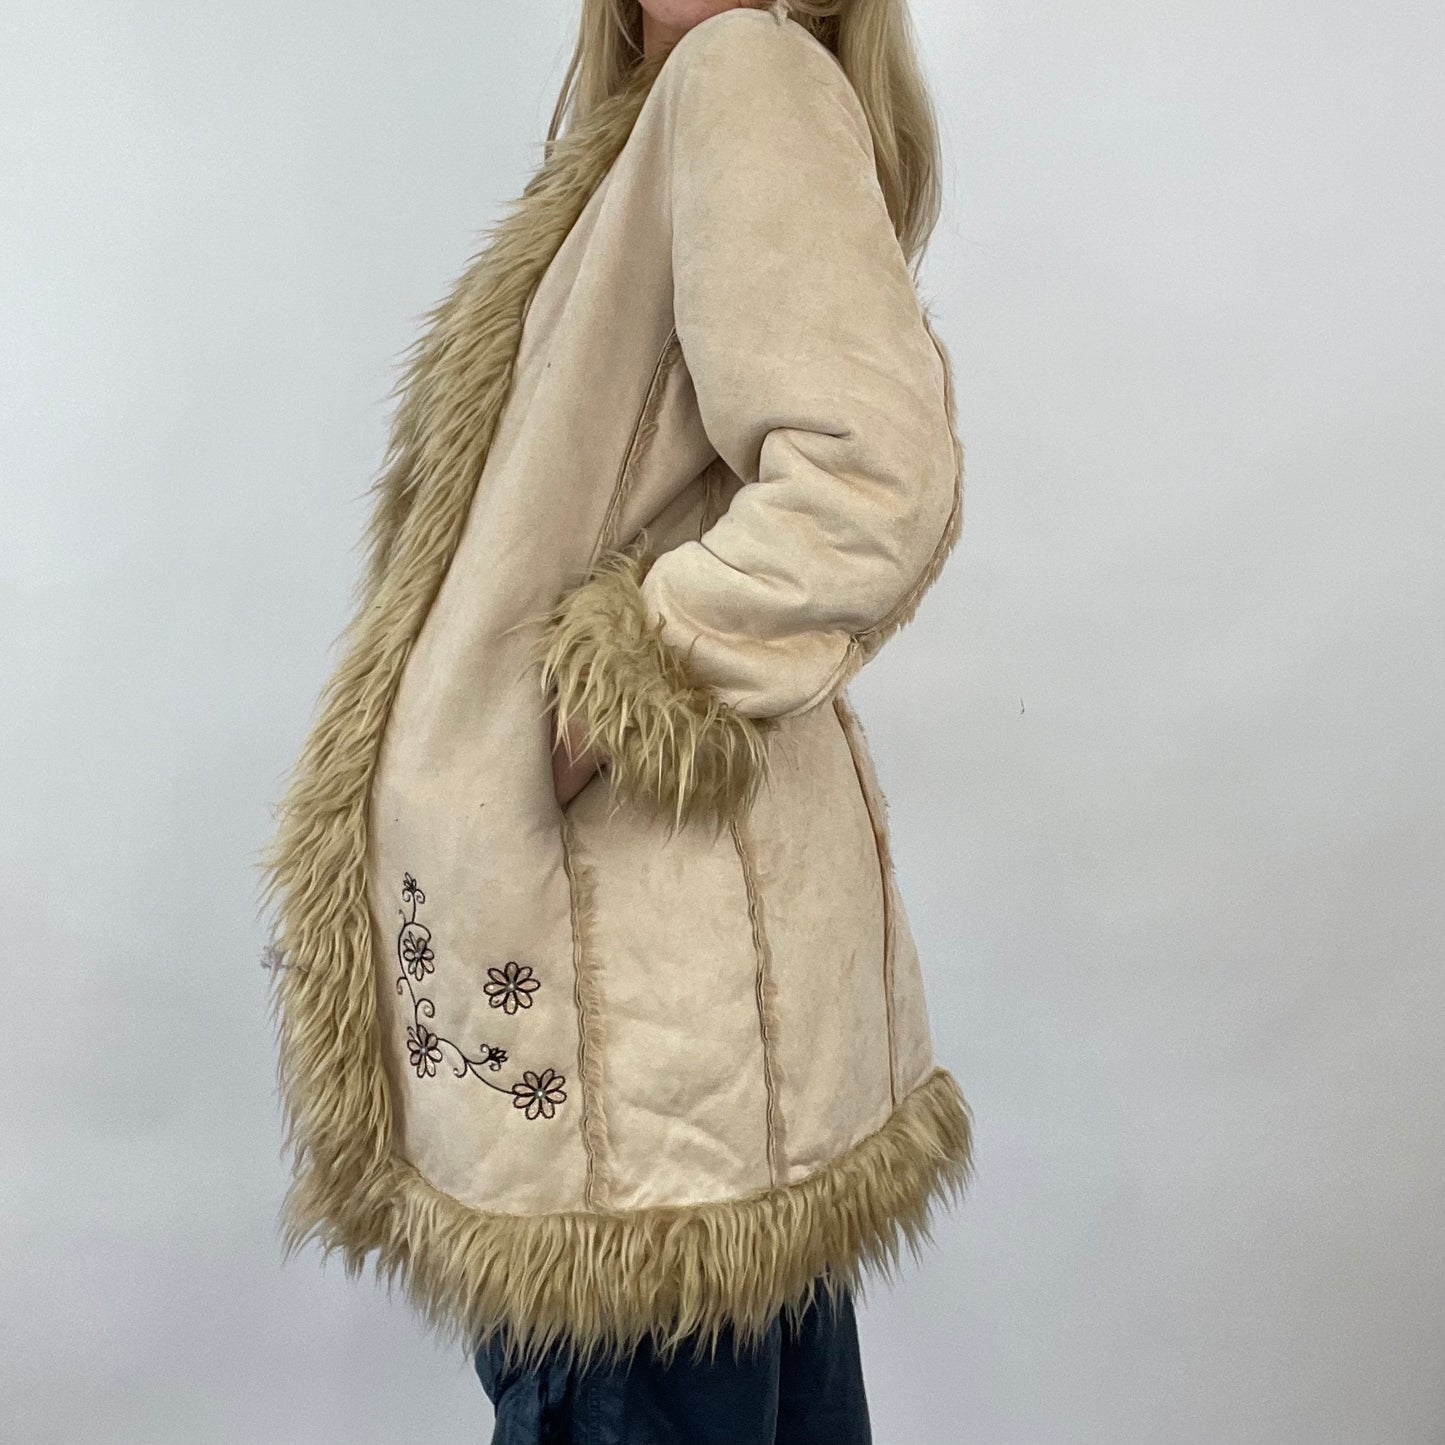 GIRL CORE DROP | small beige pimkie longline afghan style coat with floral embroidery